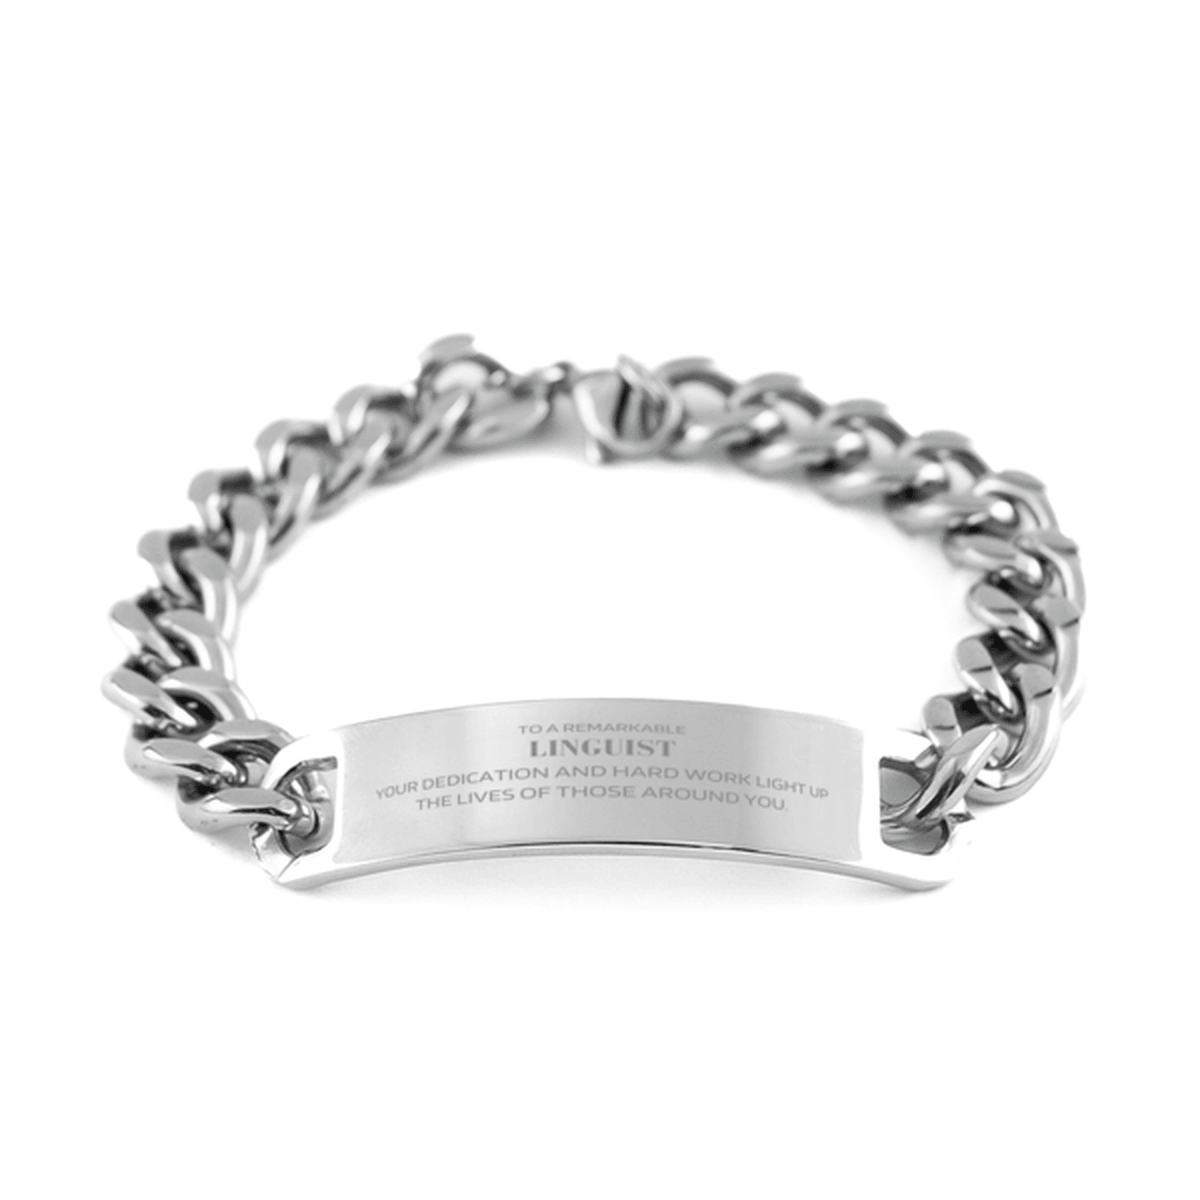 Remarkable Linguist Gifts, Your dedication and hard work, Inspirational Birthday Christmas Unique Cuban Chain Stainless Steel Bracelet For Linguist, Coworkers, Men, Women, Friends - Mallard Moon Gift Shop